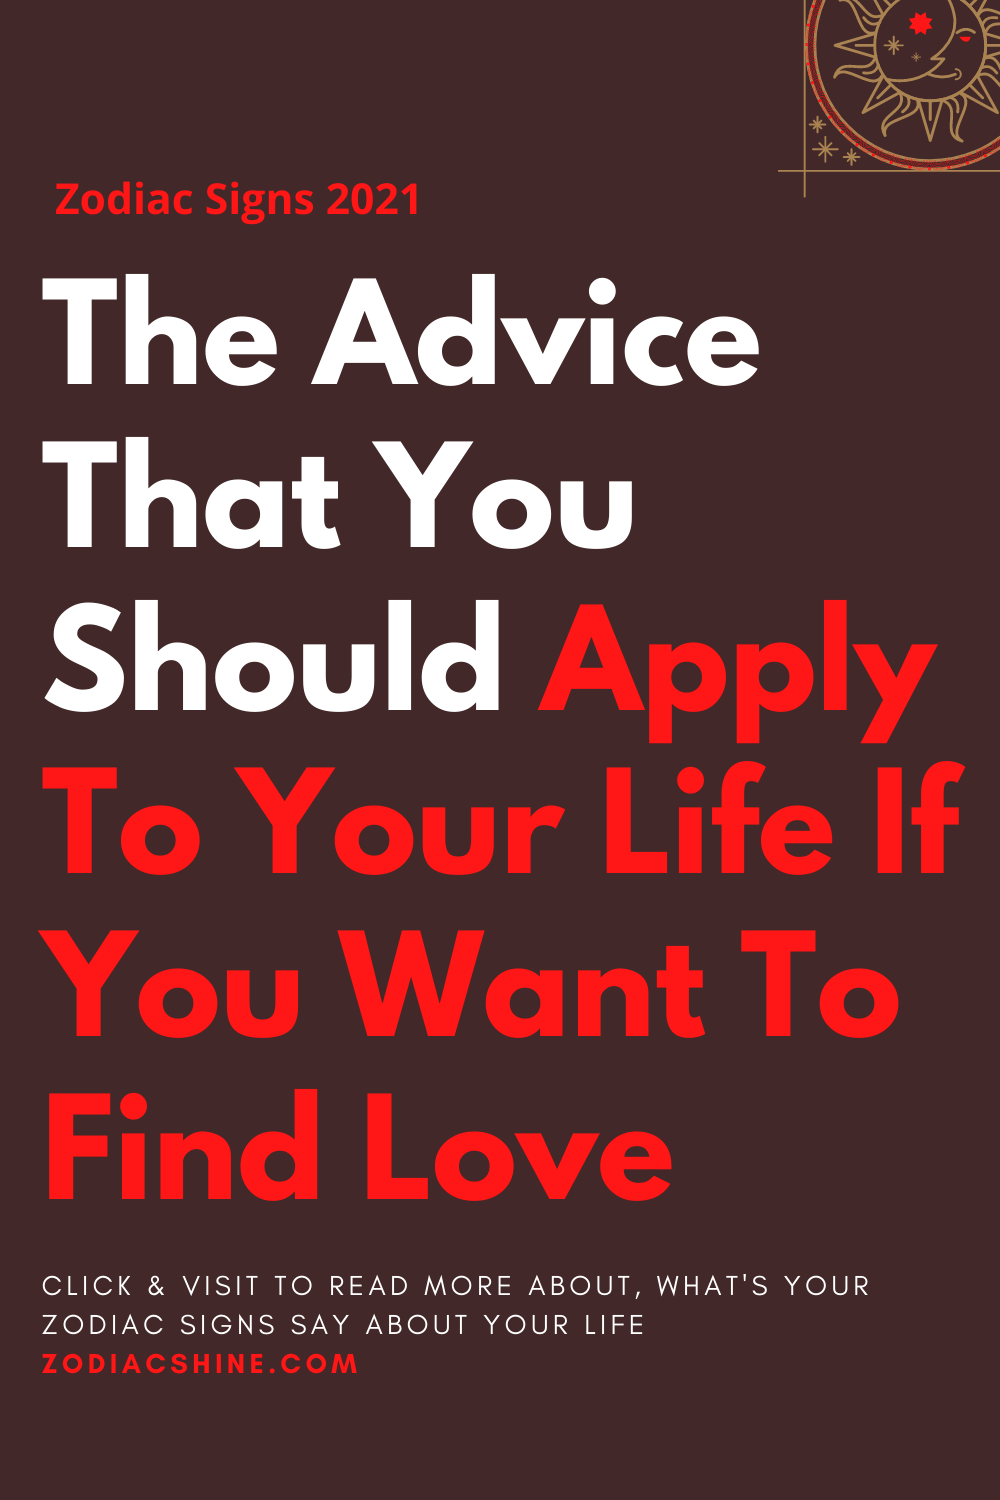 The Advice That You Should Apply To Your Life If You Want To Find Love